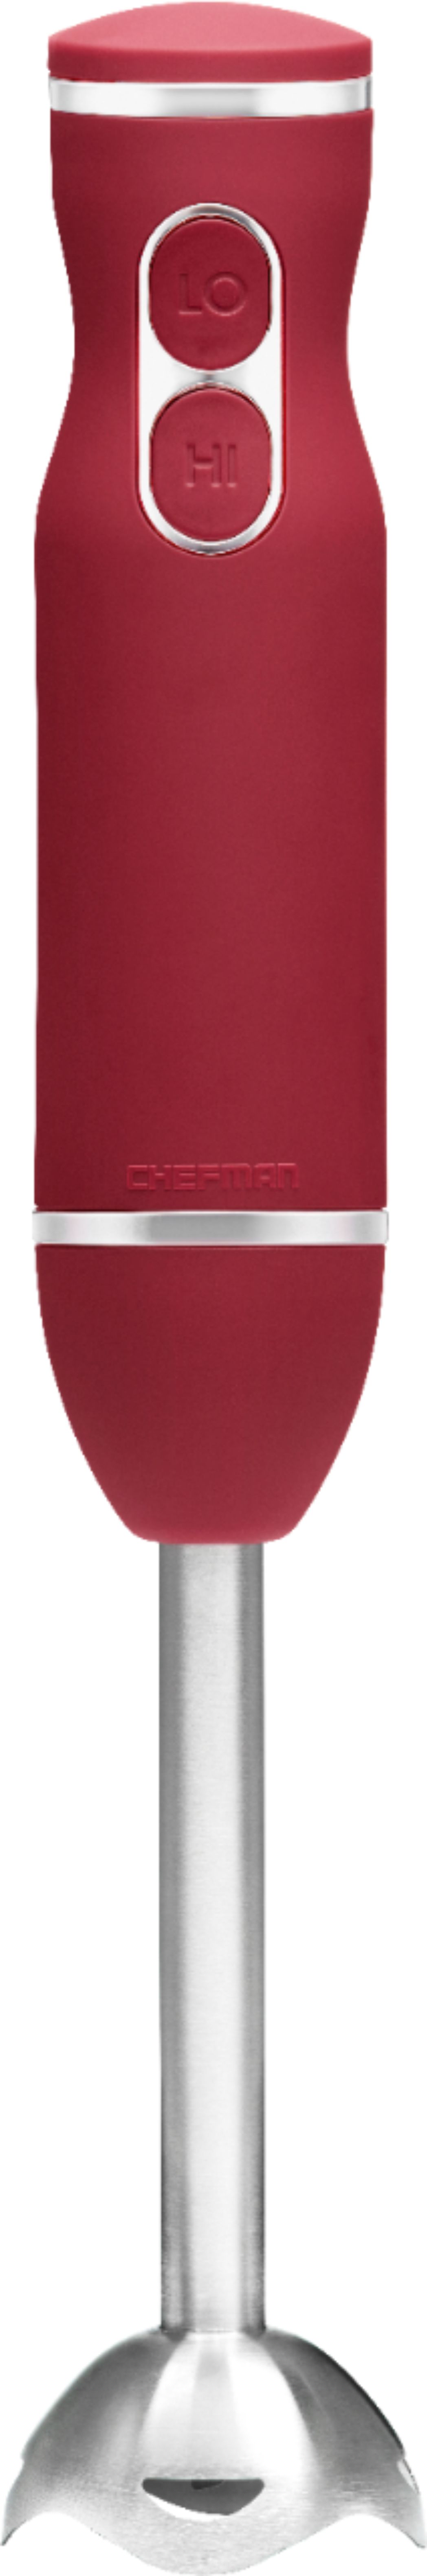 Better Chef DualPro 2 Speed Immersion Hand Blender Red - Office Depot